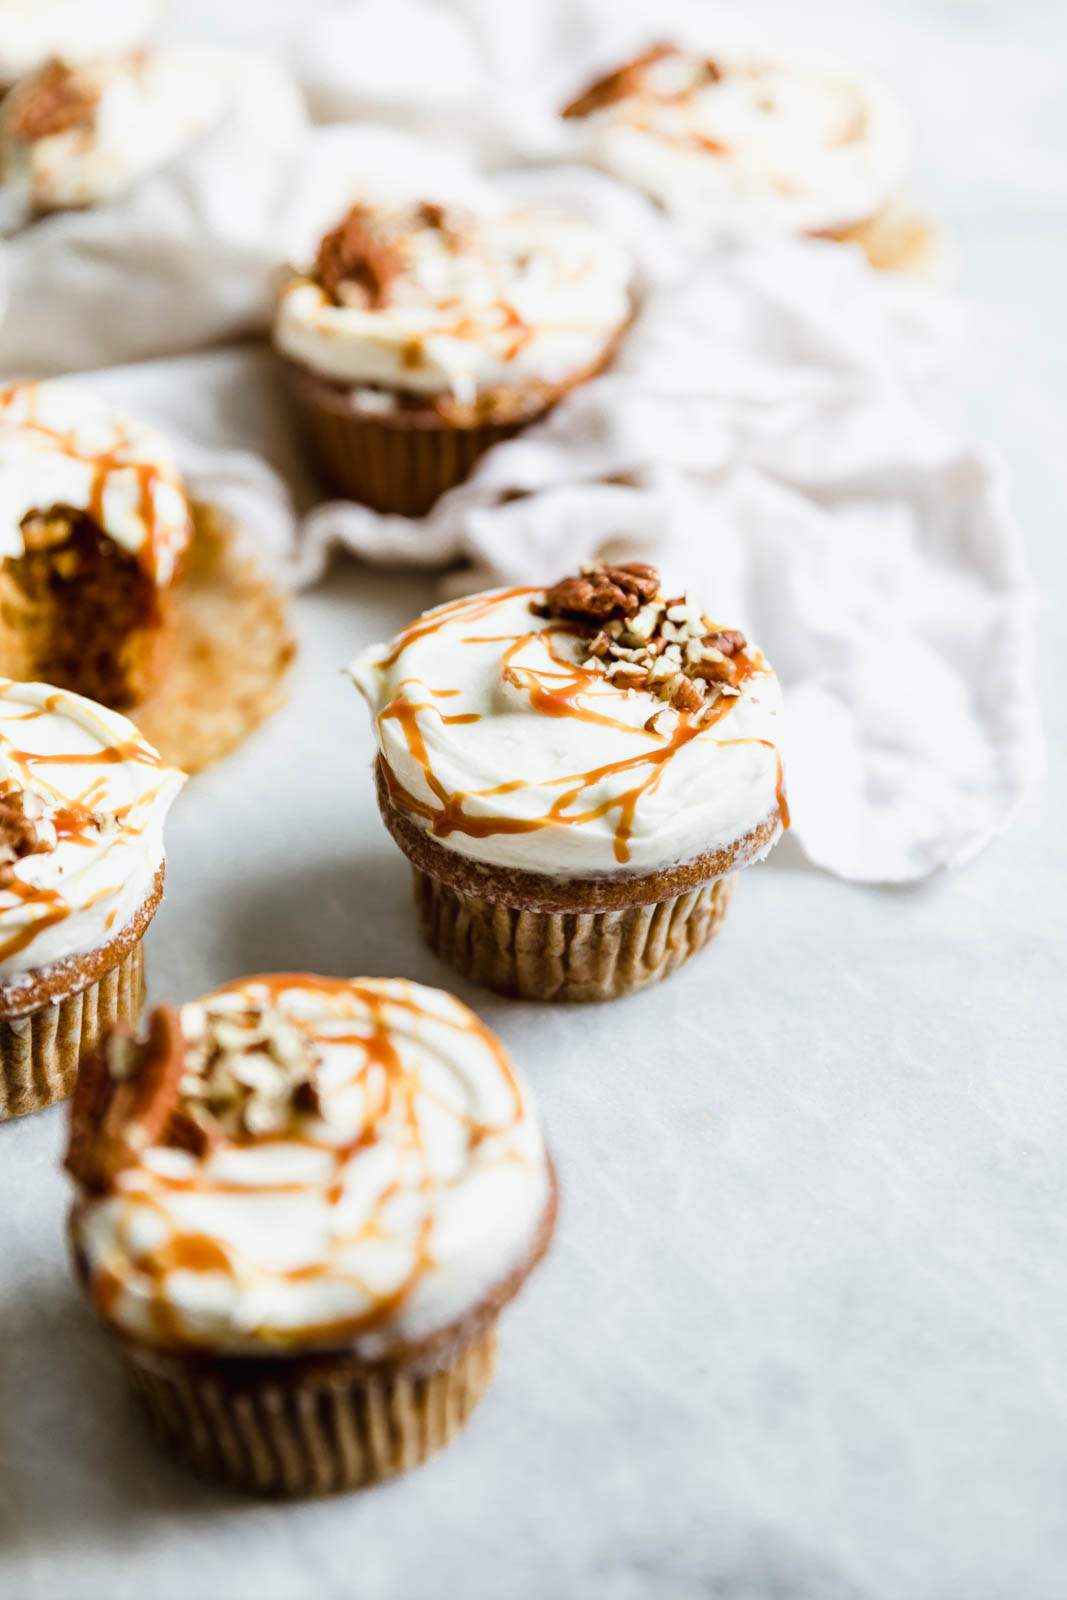 The perfect winter cupcake is here! Sweet potato cupcakes flavored with cinnamon and ginger and topped with a tangy cream cheese frosting.